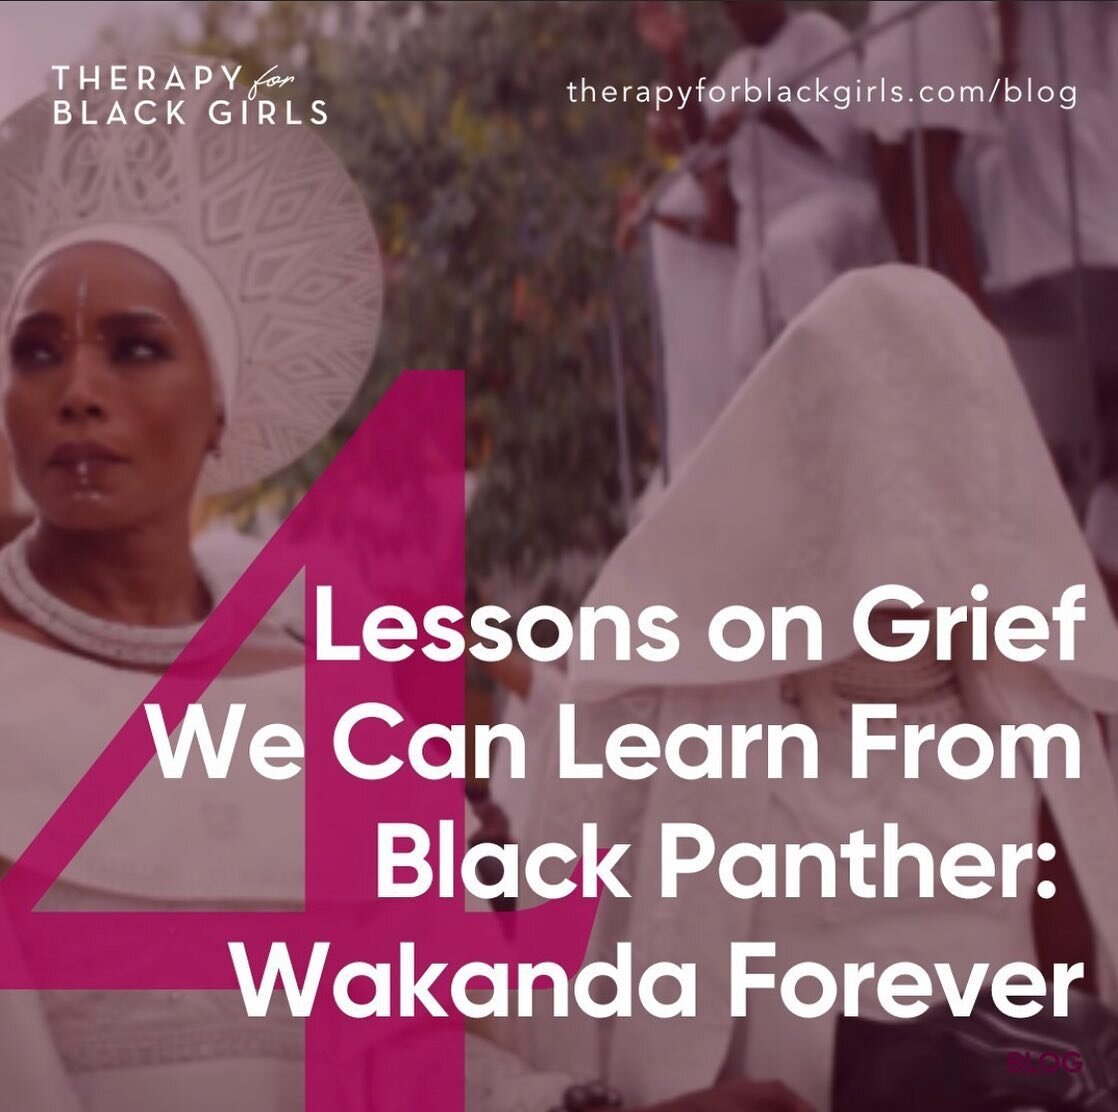 I had the pleasure of contributing to the @therapyforblackgirls blog recently. I had the opportunity to write about the theme of grief in the film Black Panther: Wakanda Forever. Writing this required me to tap into my own experiences with grief and 